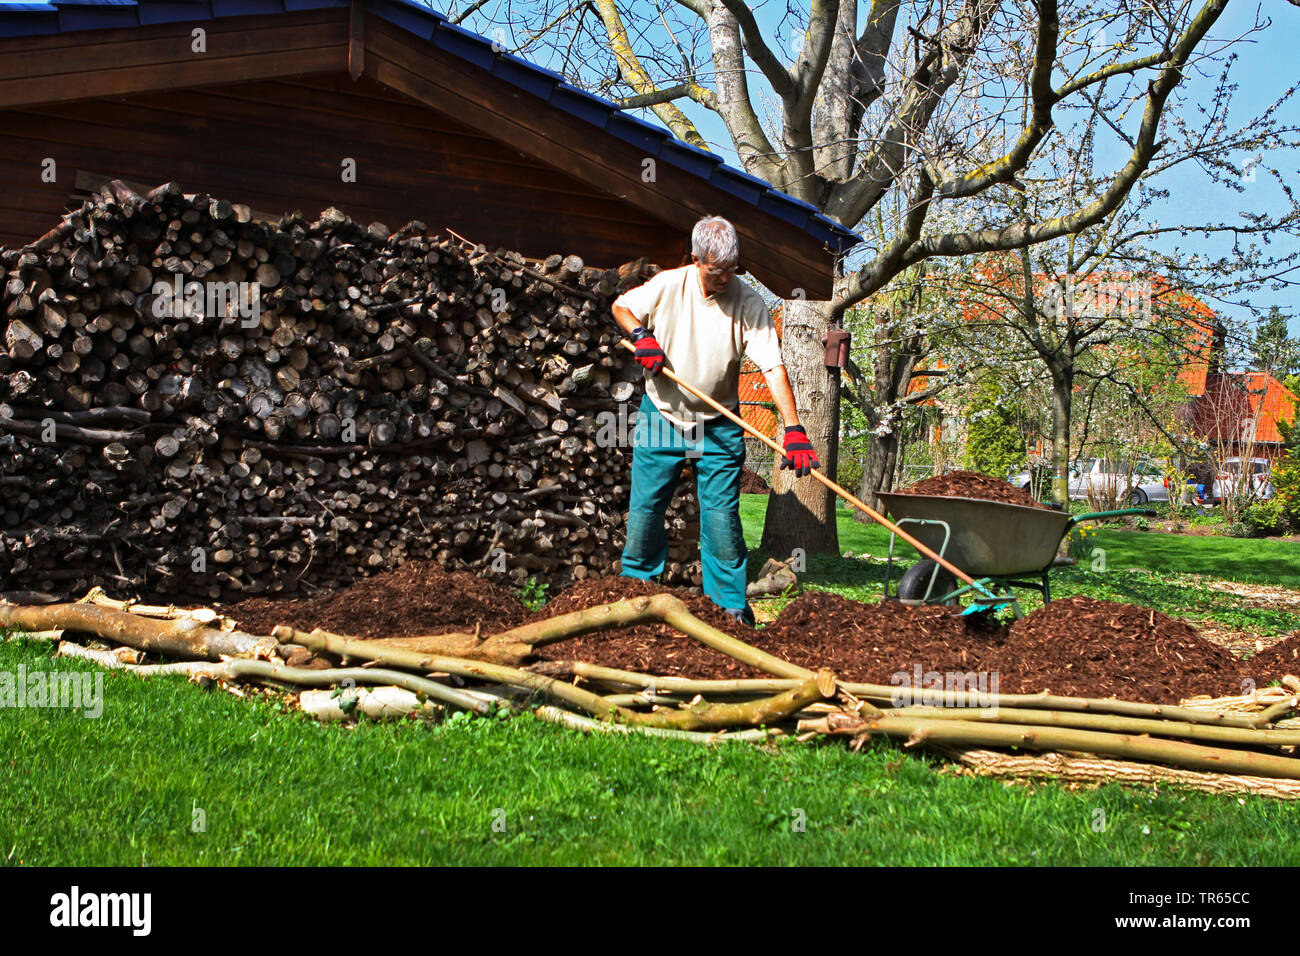 man working in a garden, wood stack, mount of bark mulch and barrow, Germany, North Rhine-Westphalia Stock Photo